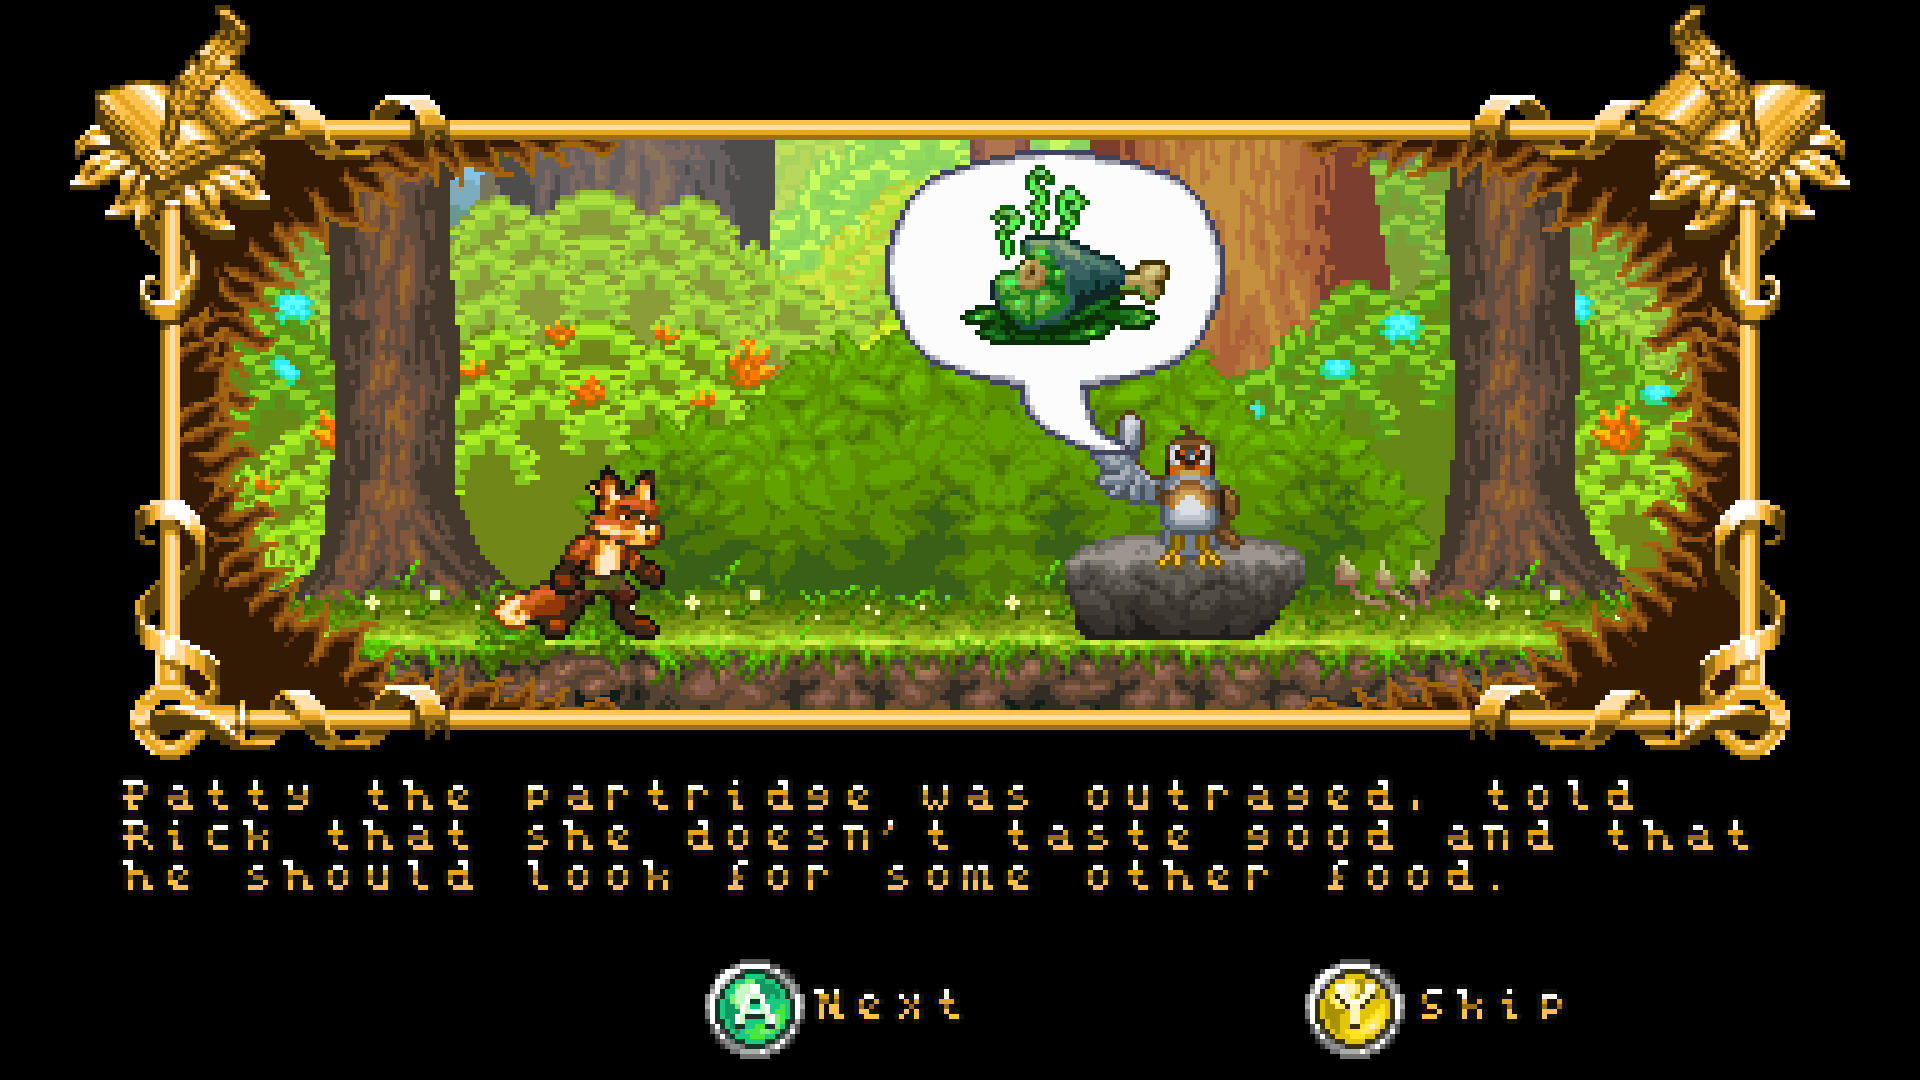 Fox n forests